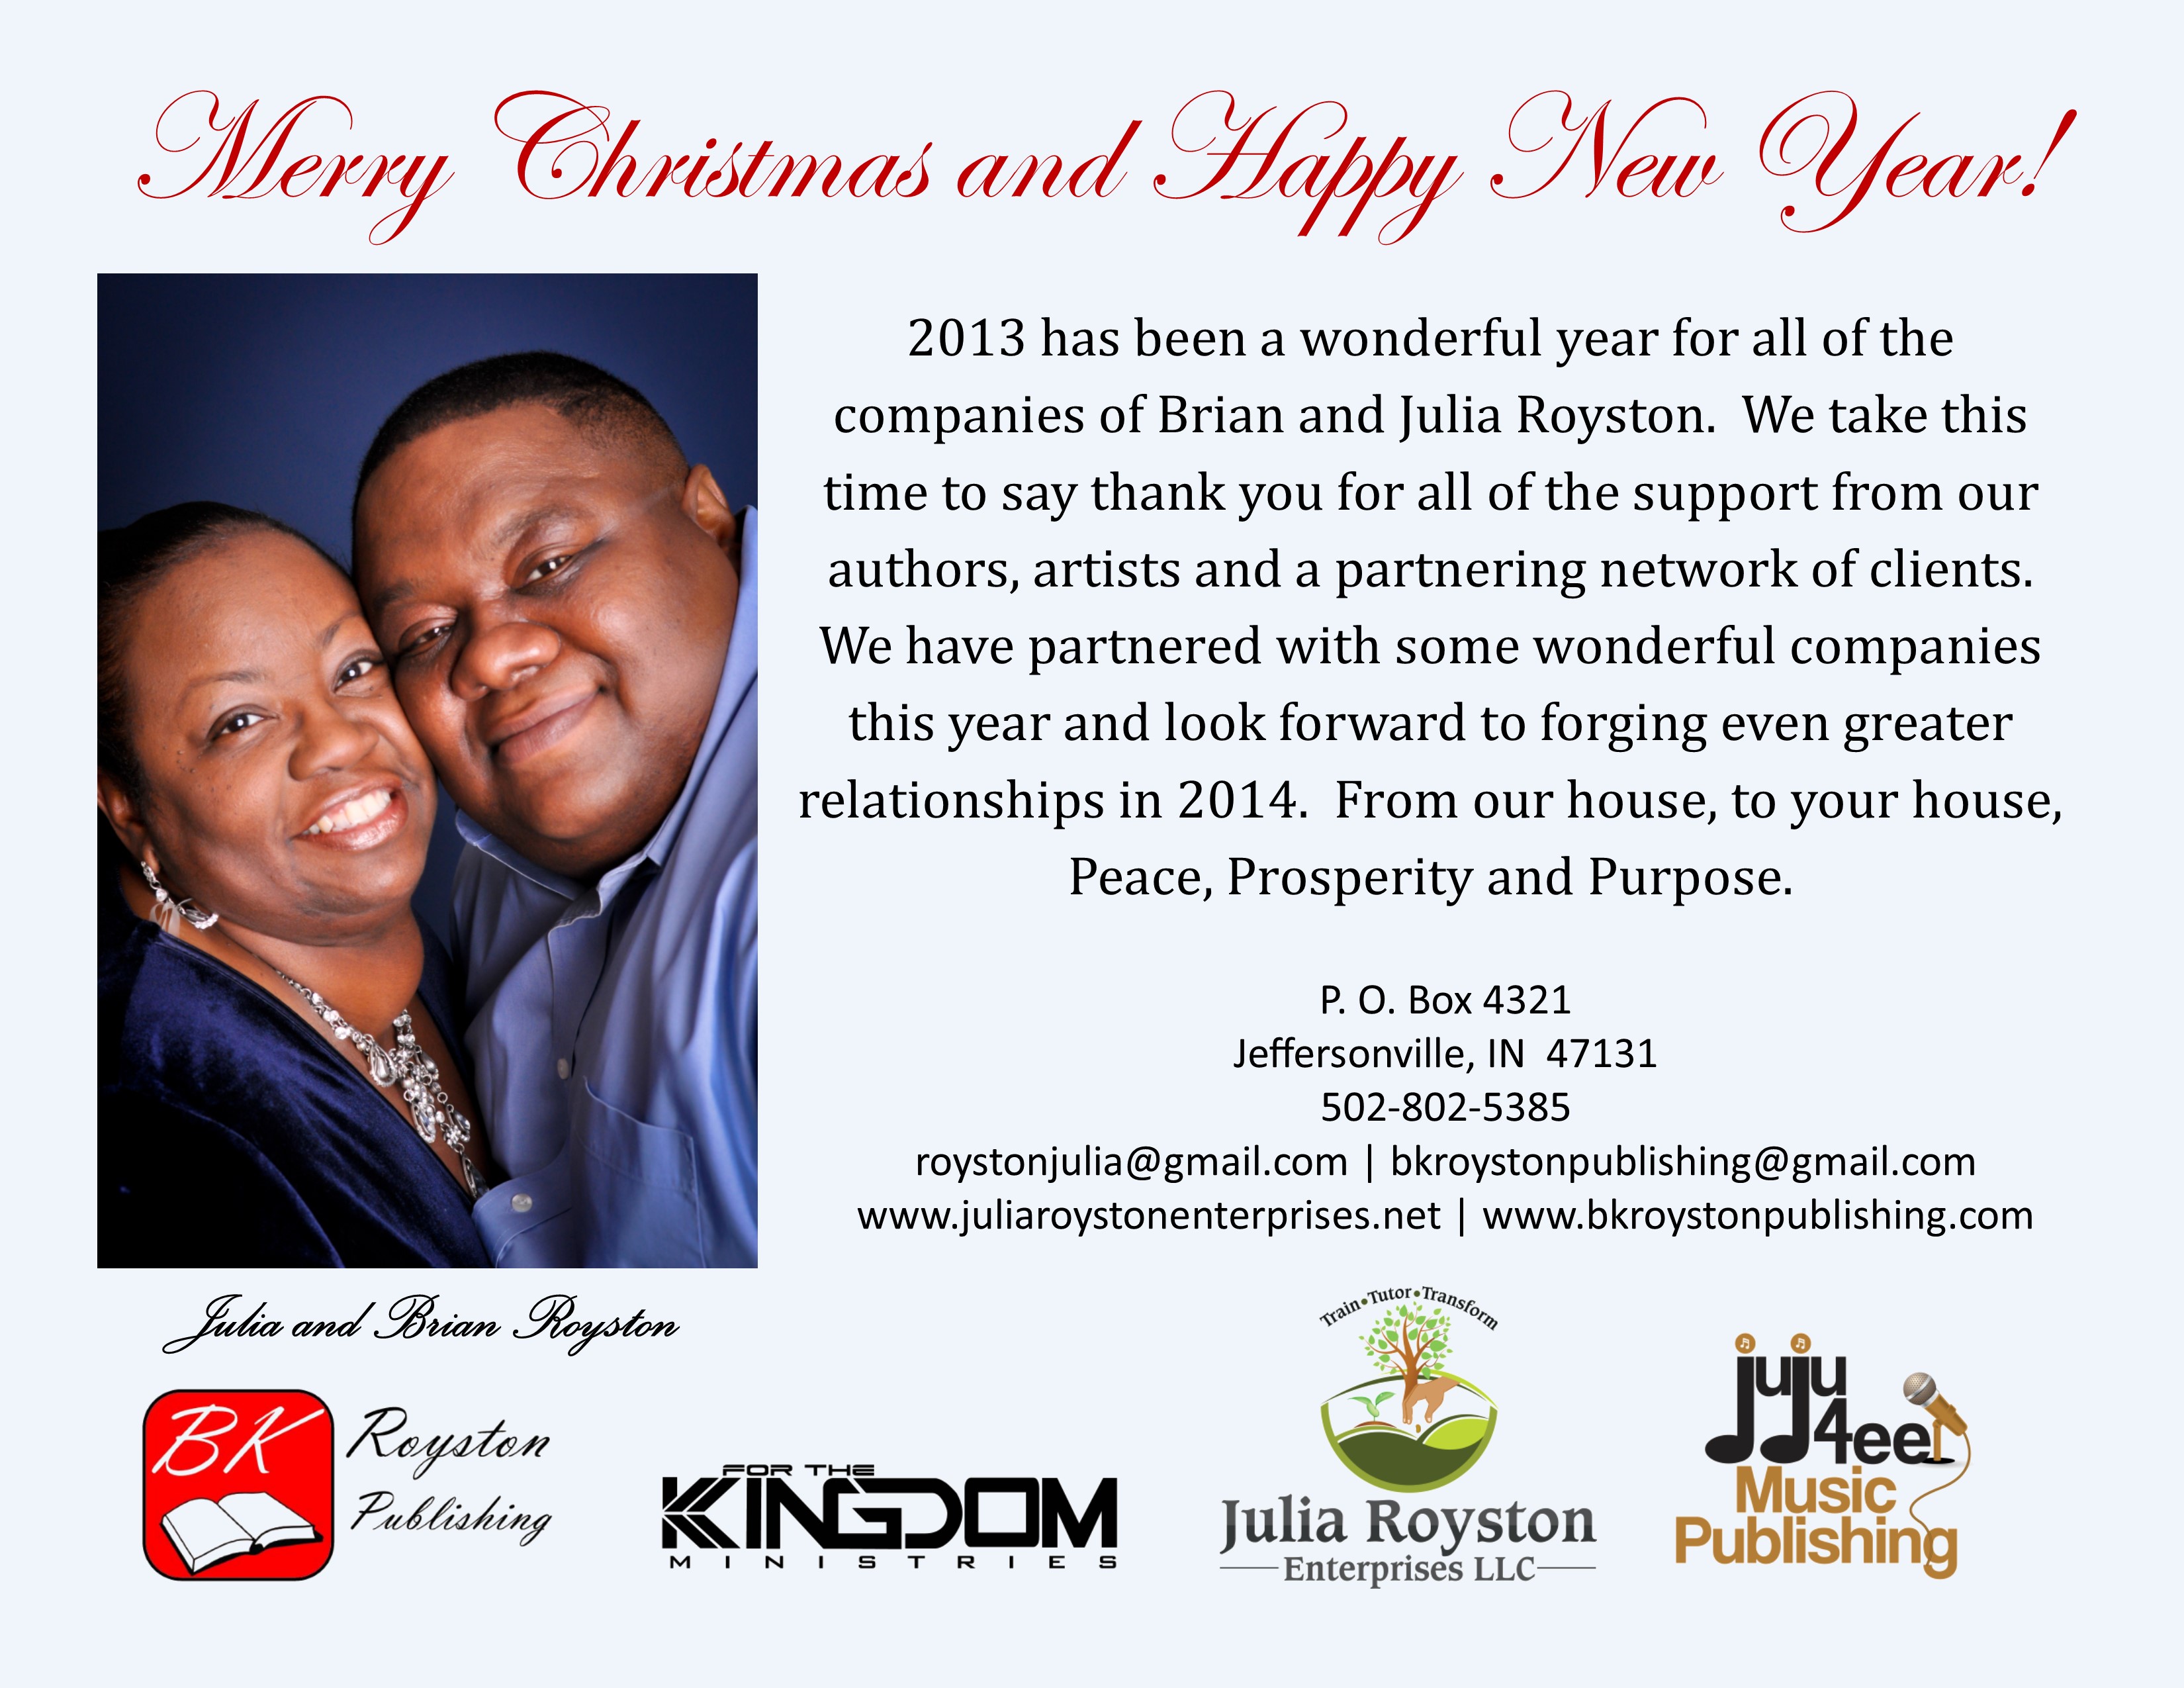 Christmas greeting from JAR and BKR 2013